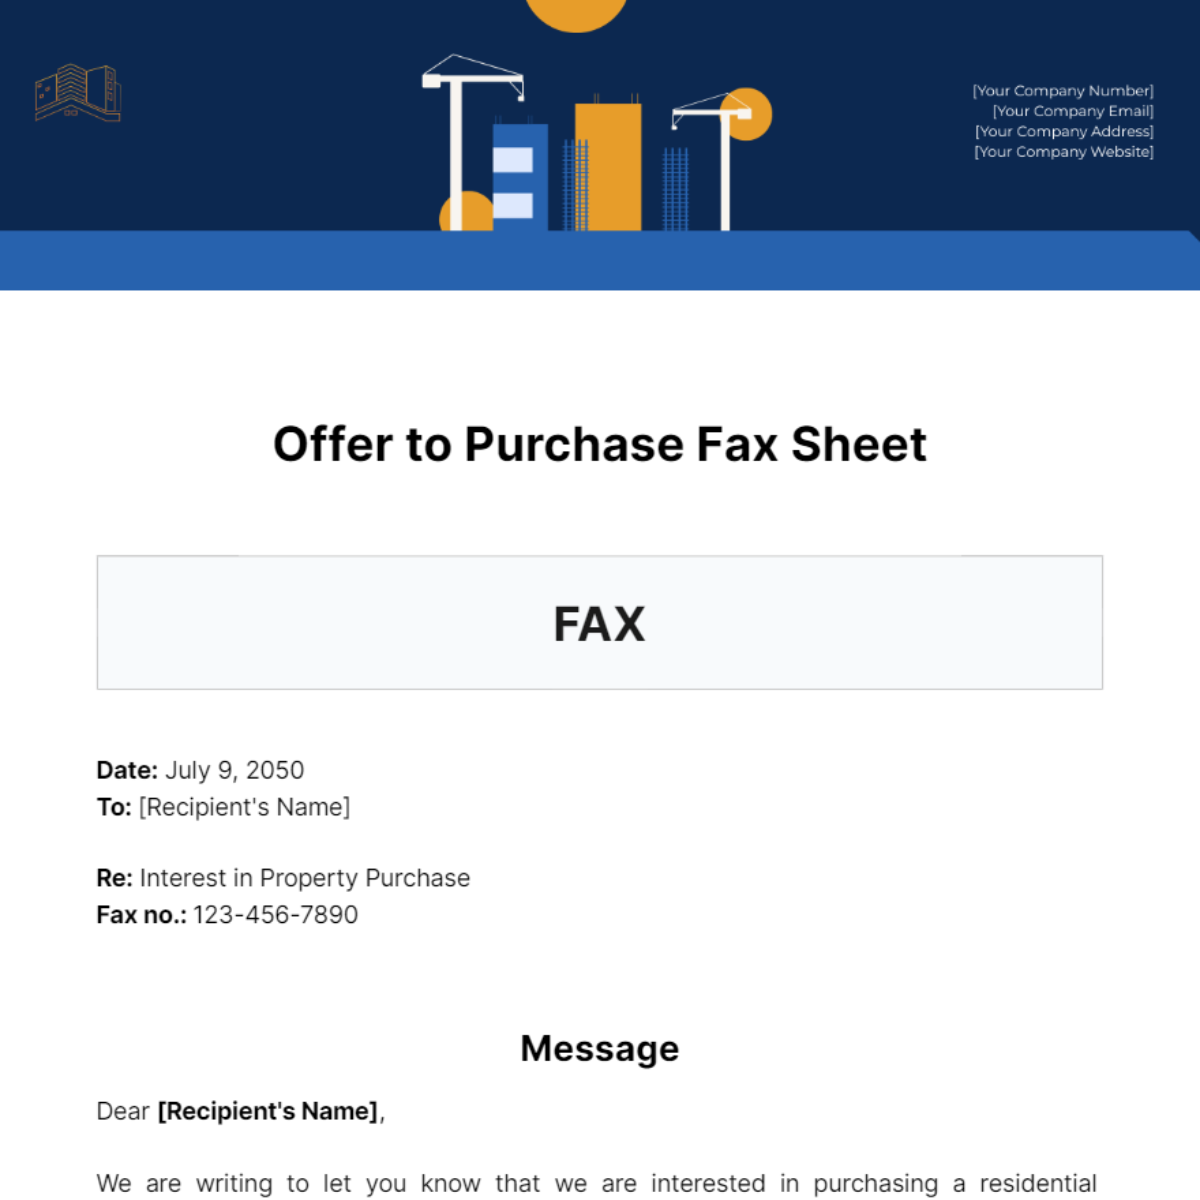 Offer to Purchase Fax Sheet Template